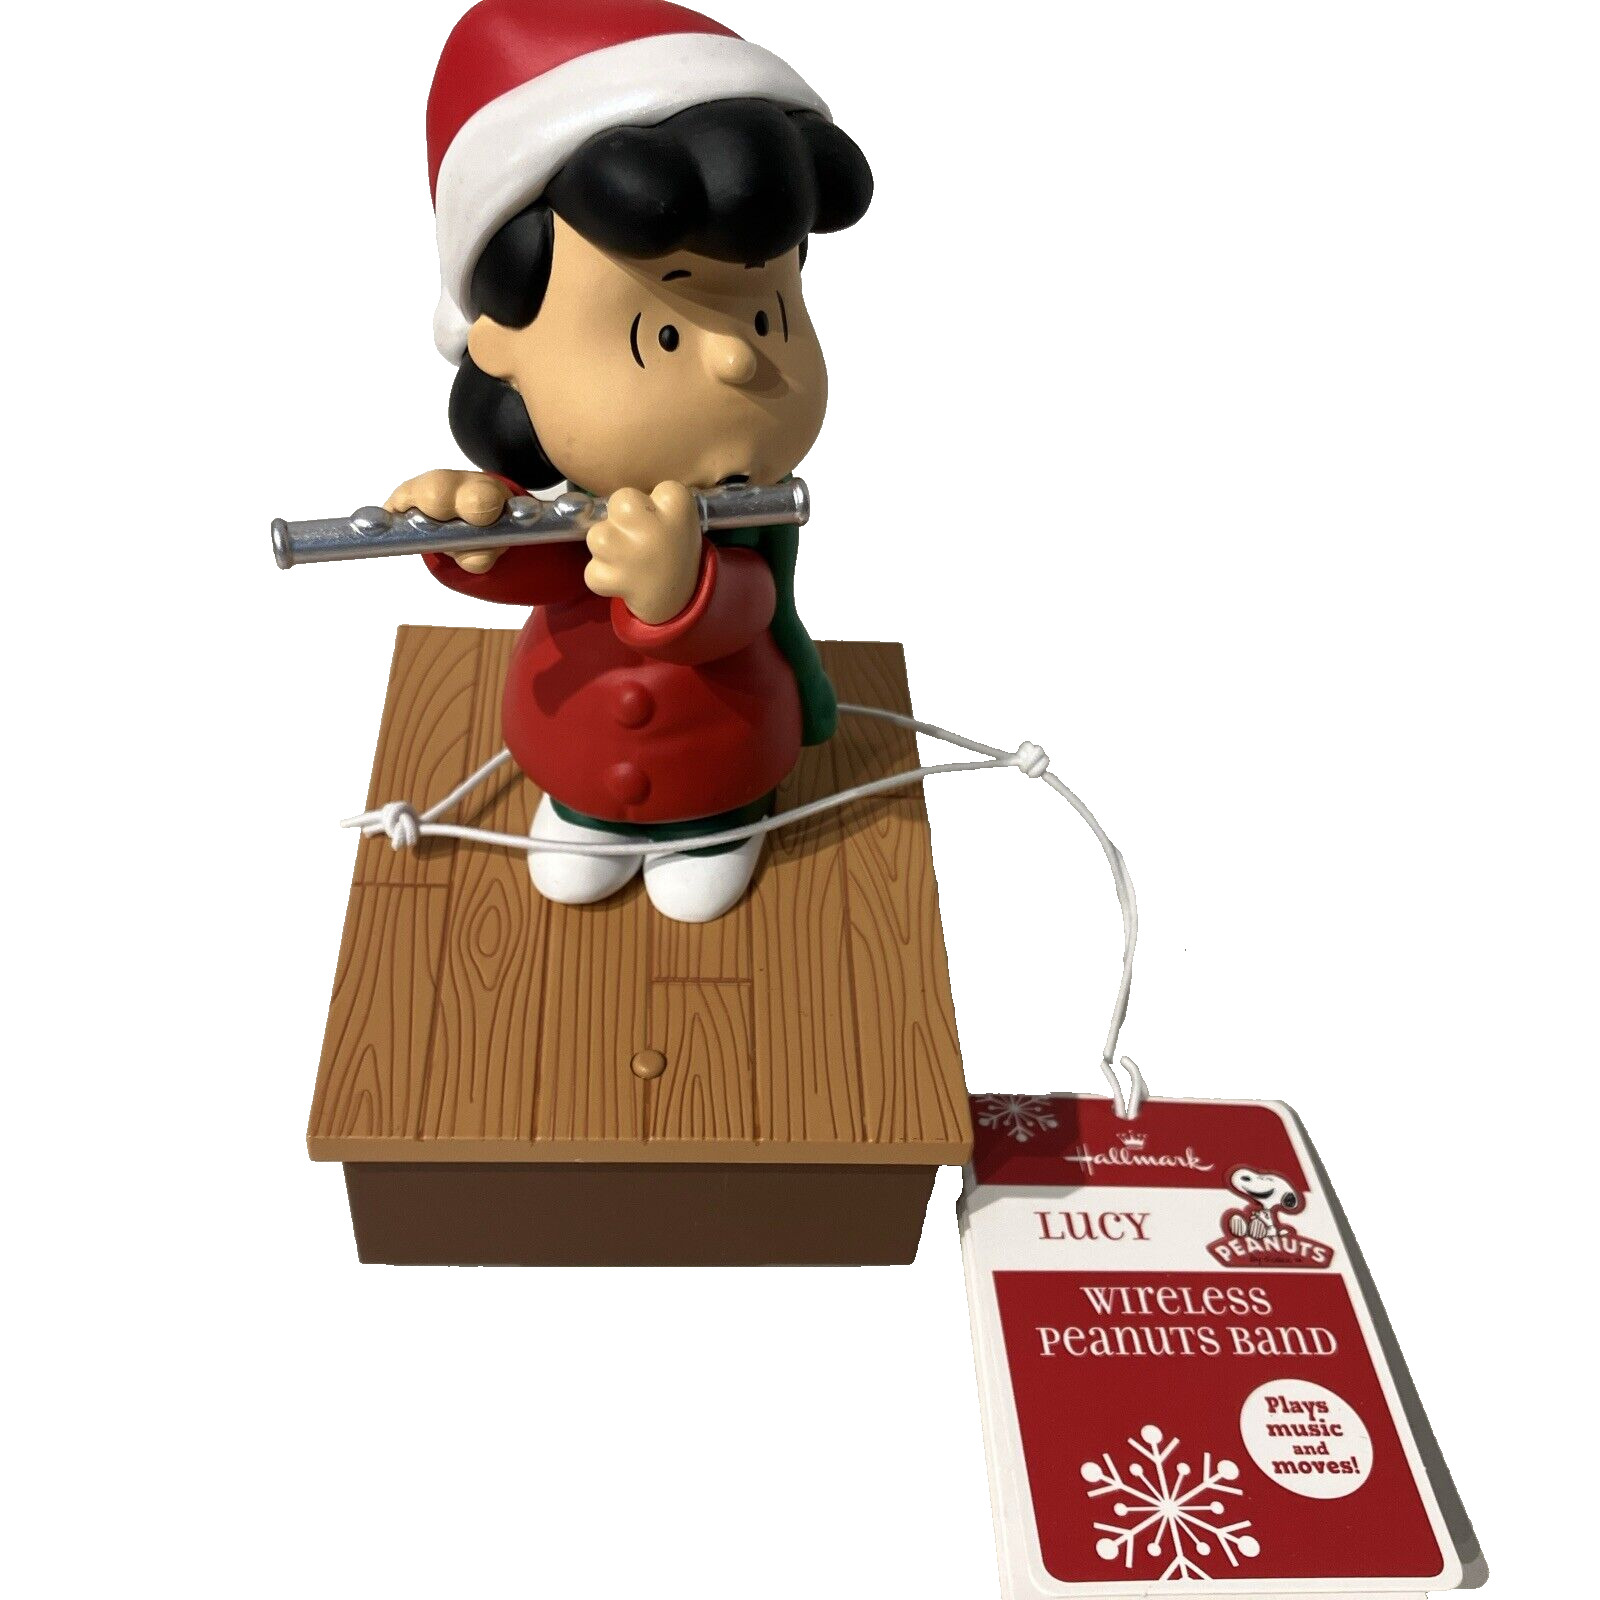 2011 Hallmark Peanuts Lucy Wireless Band. Christmas. Tested. Works.